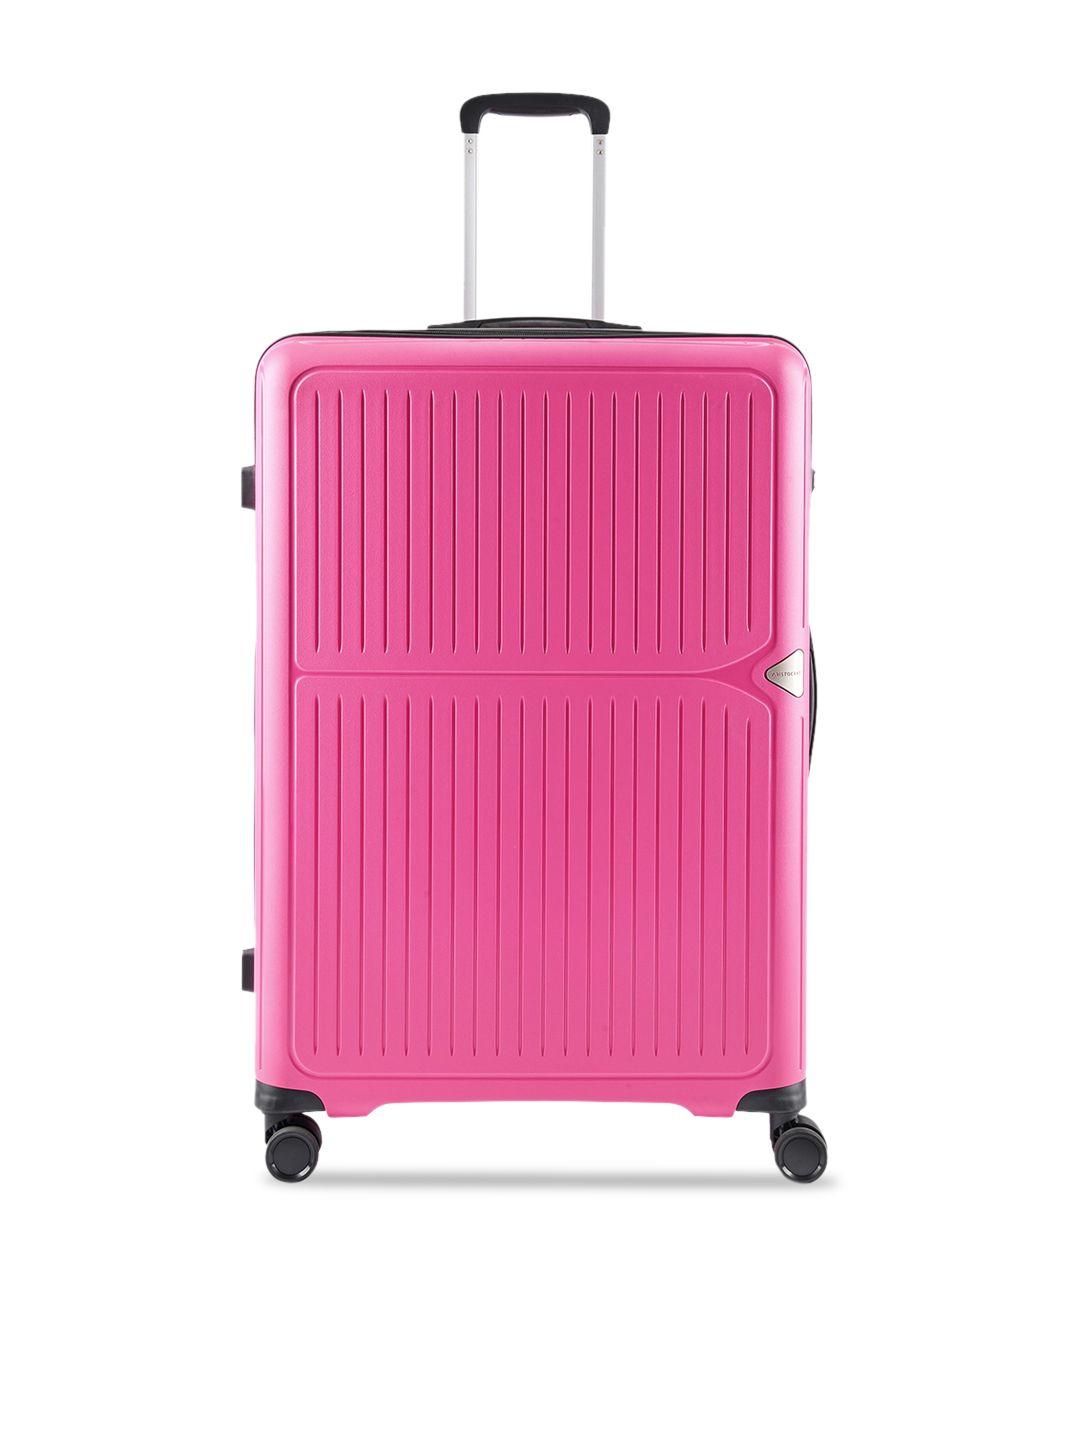 aristocrat textured 360 degree rotation hard sided luggage trolley